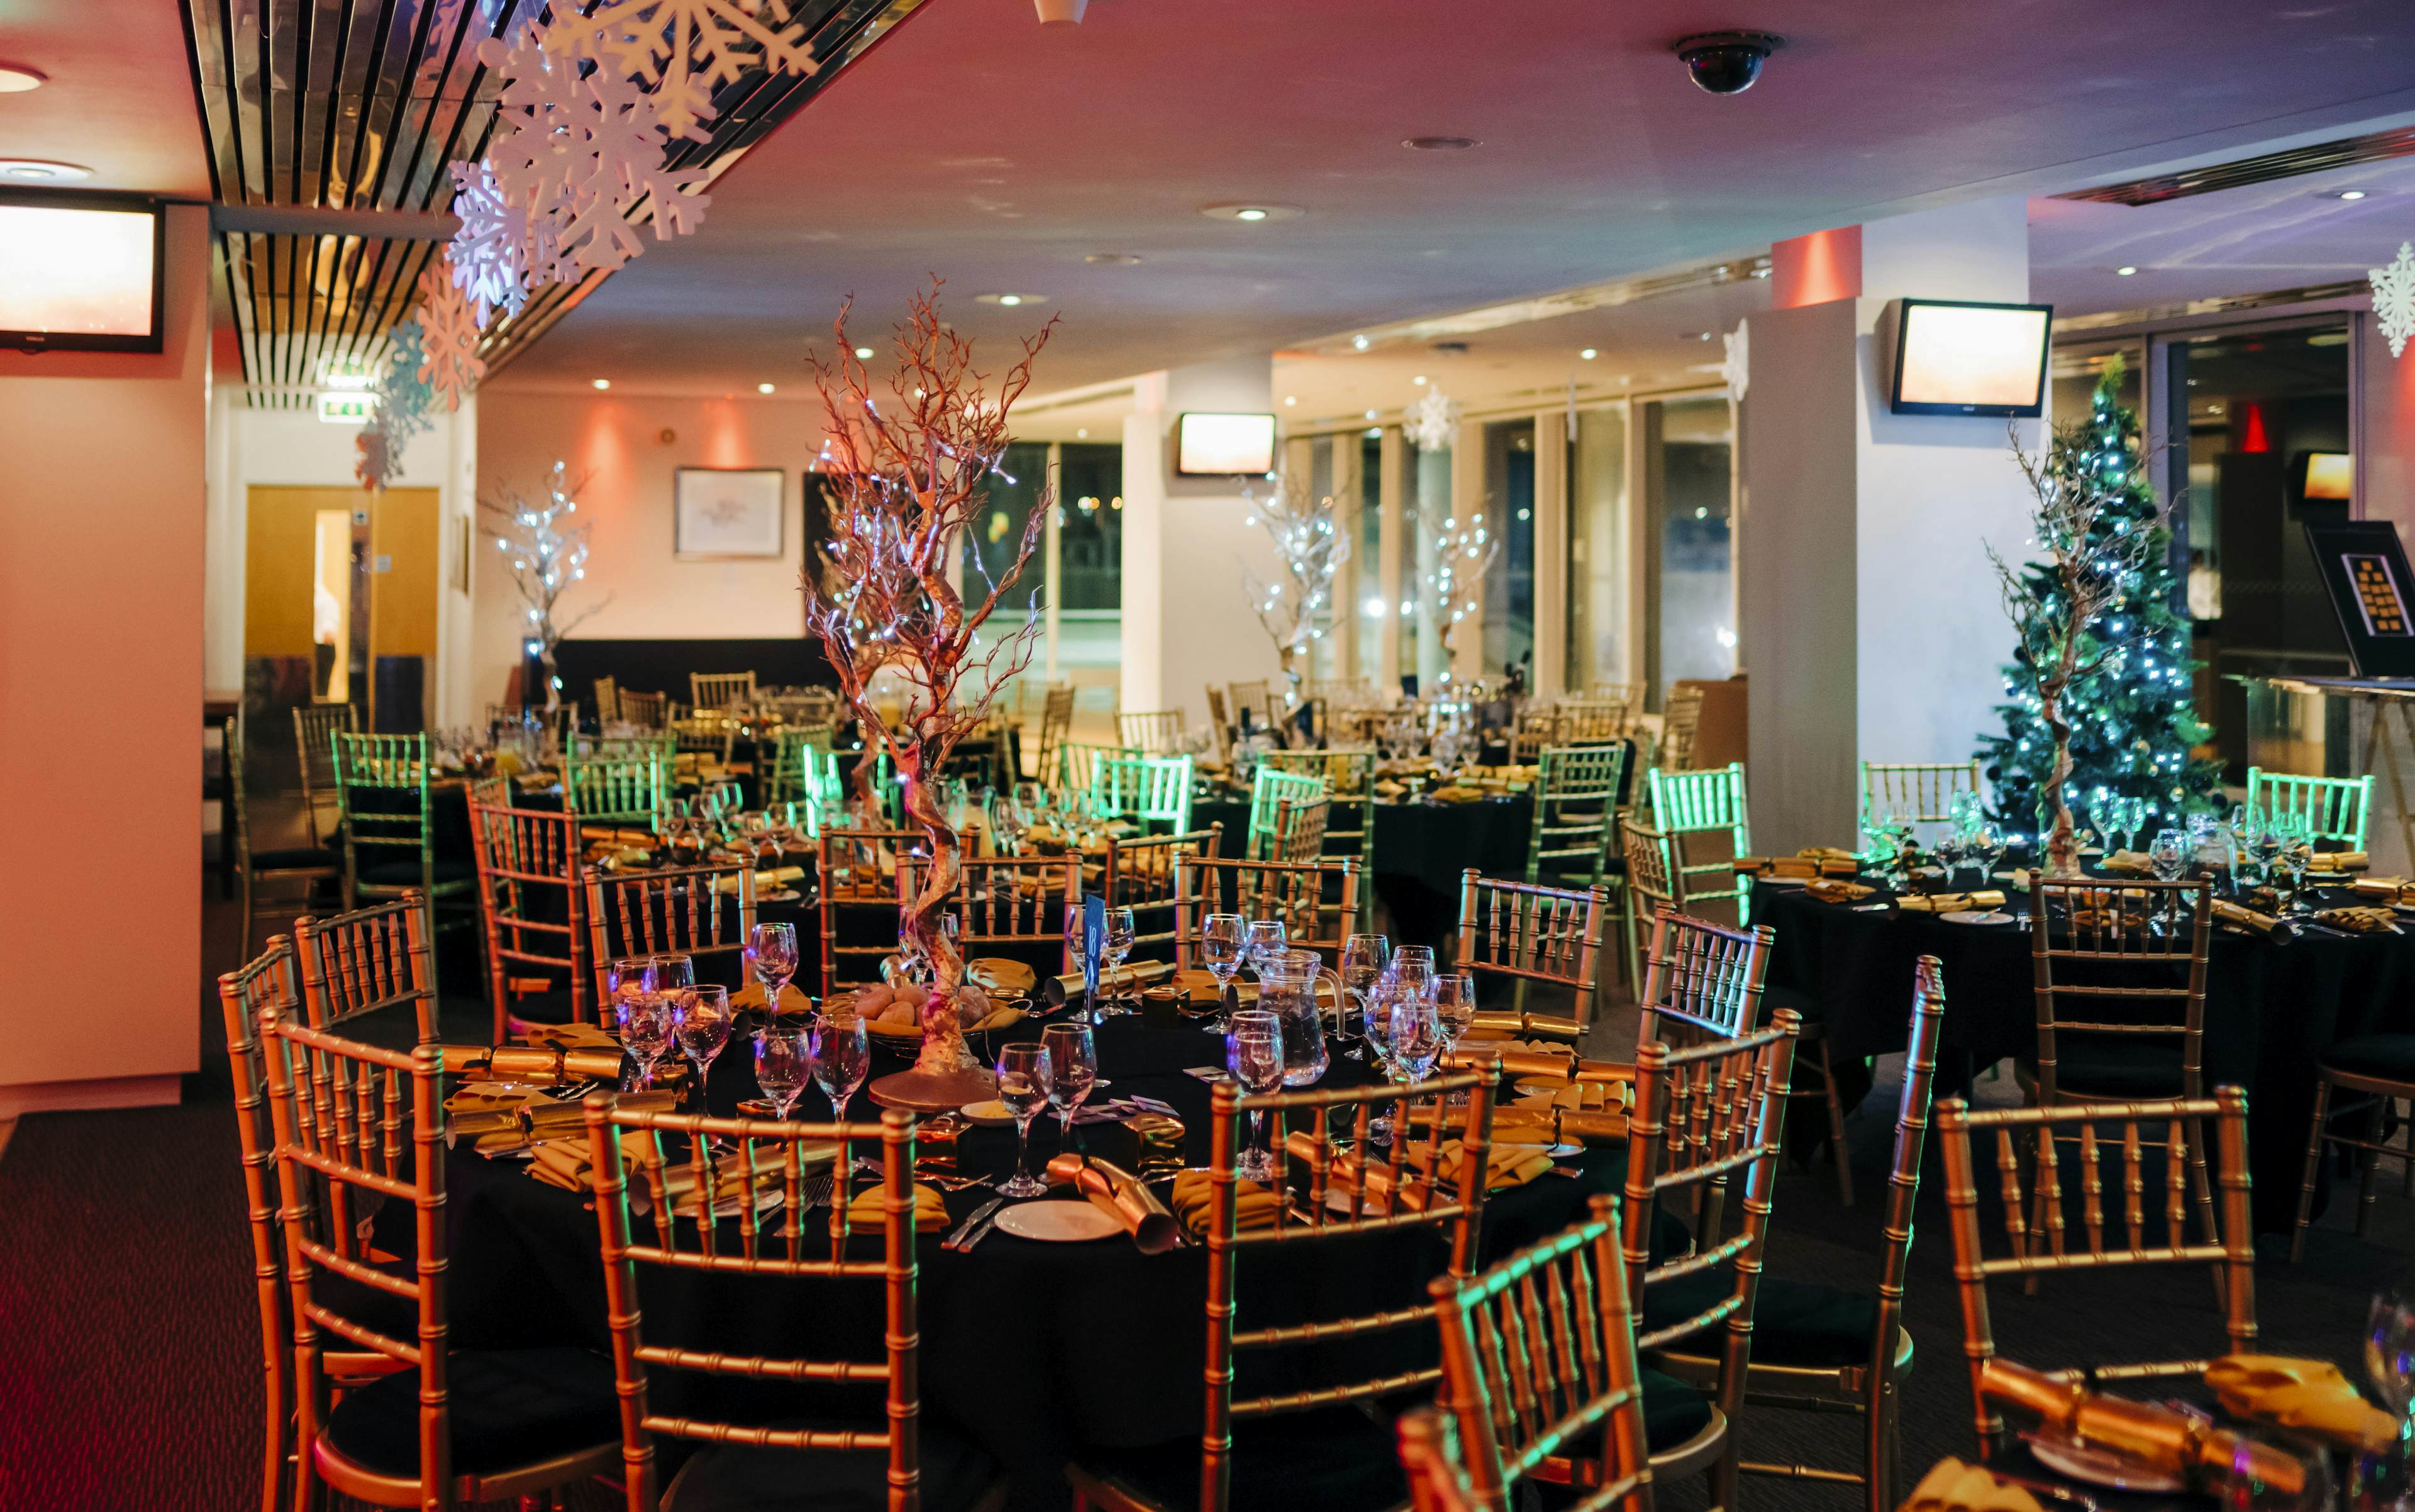 Epsom Downs Racecourse - Blue Riband Room image 1